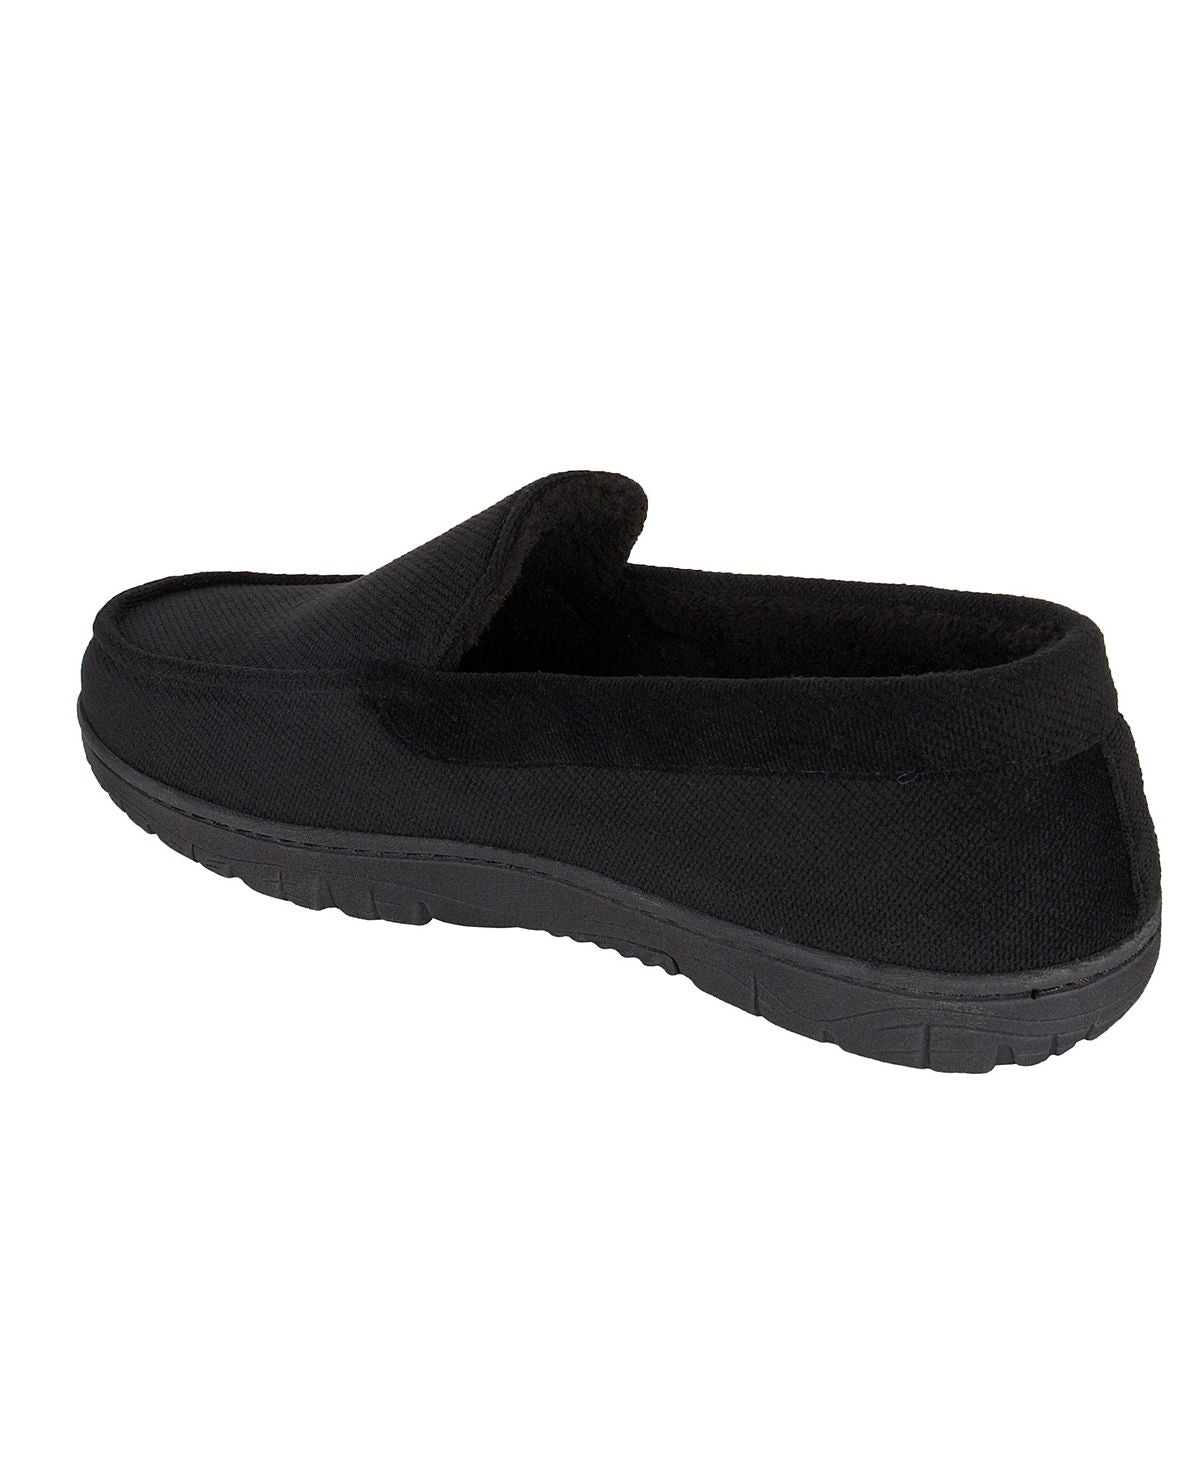 Kenneth Cole Reaction Micro-suede Venetian Moccasin Slipper Black